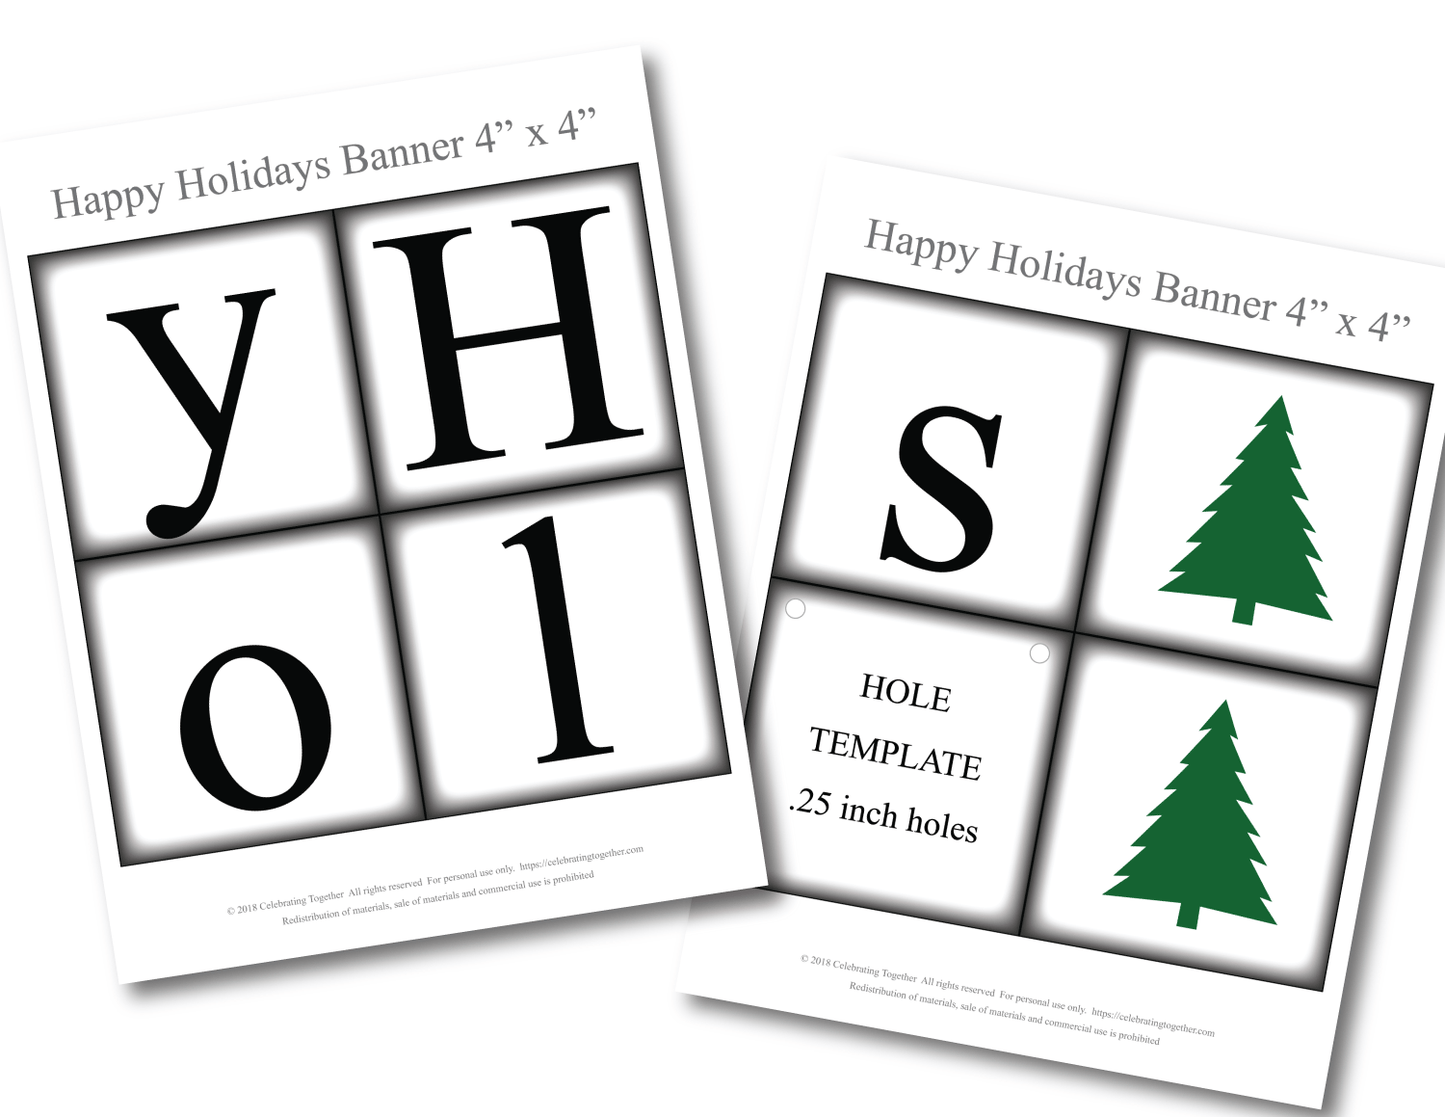 Printable pages for Happy Holiday banner - DIY Holiday decorations - Celebrating Together